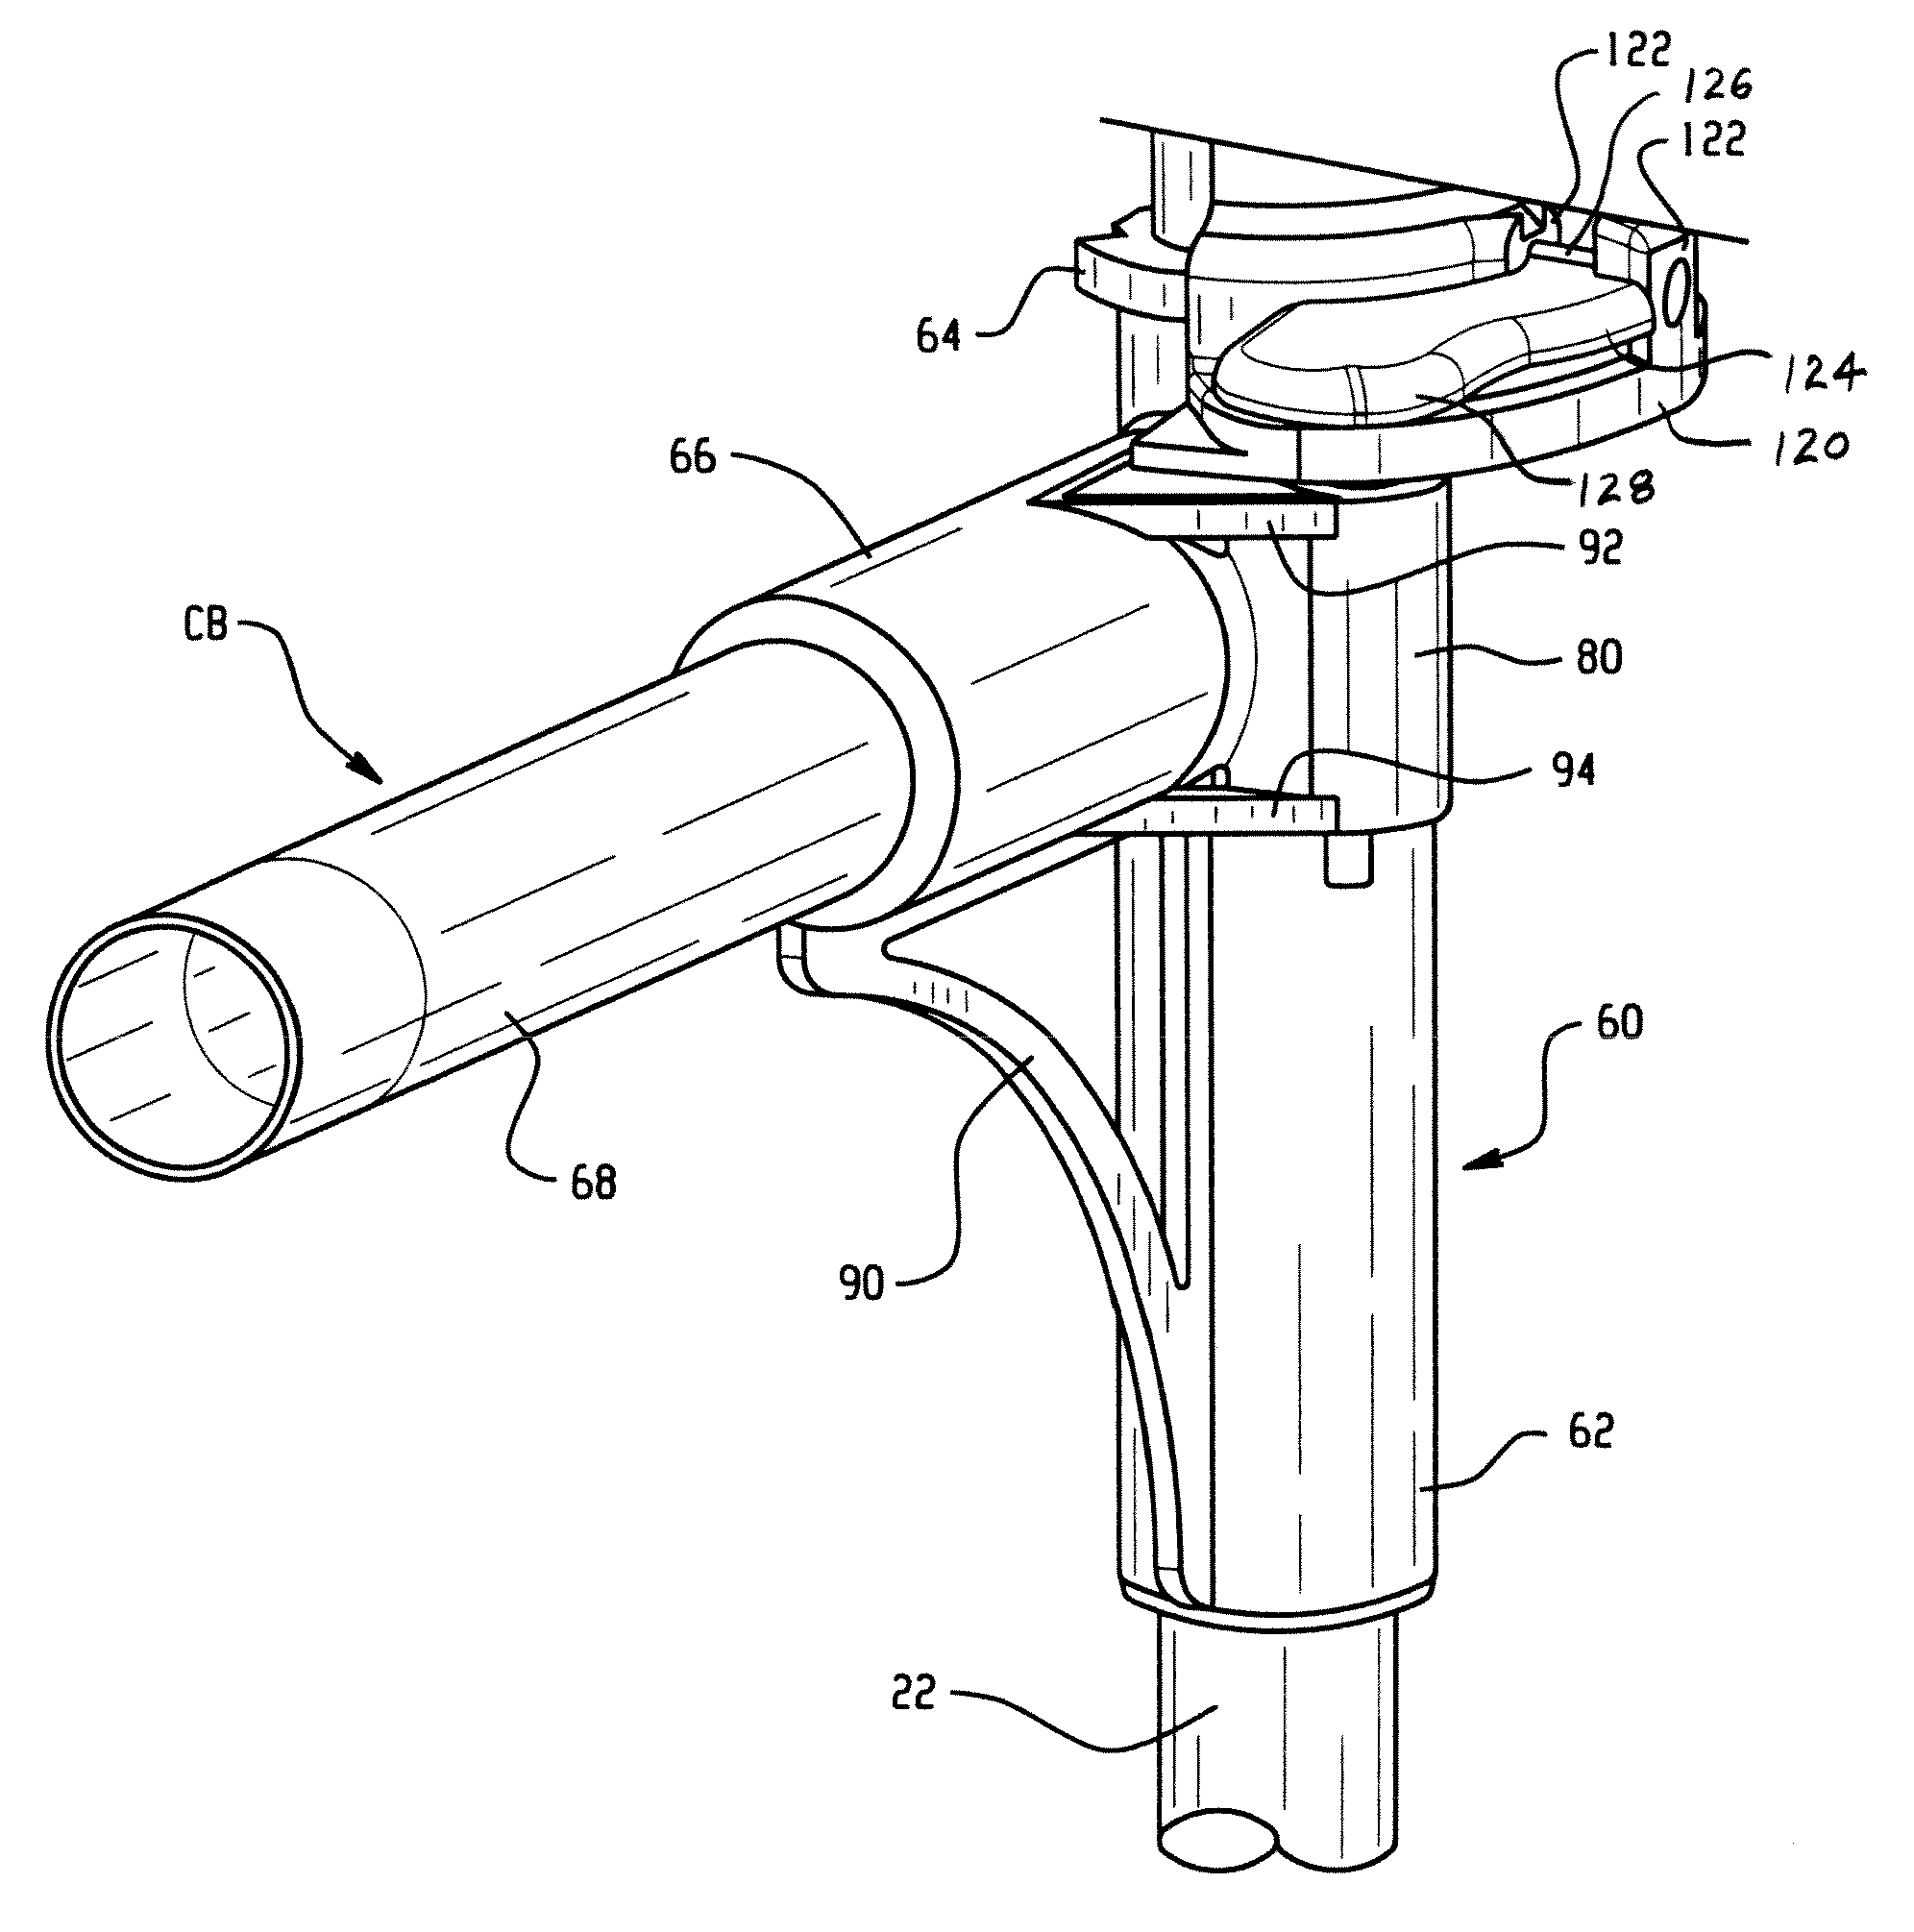 Foldable durable product, such as a patient aid device or walker, and method of forming same